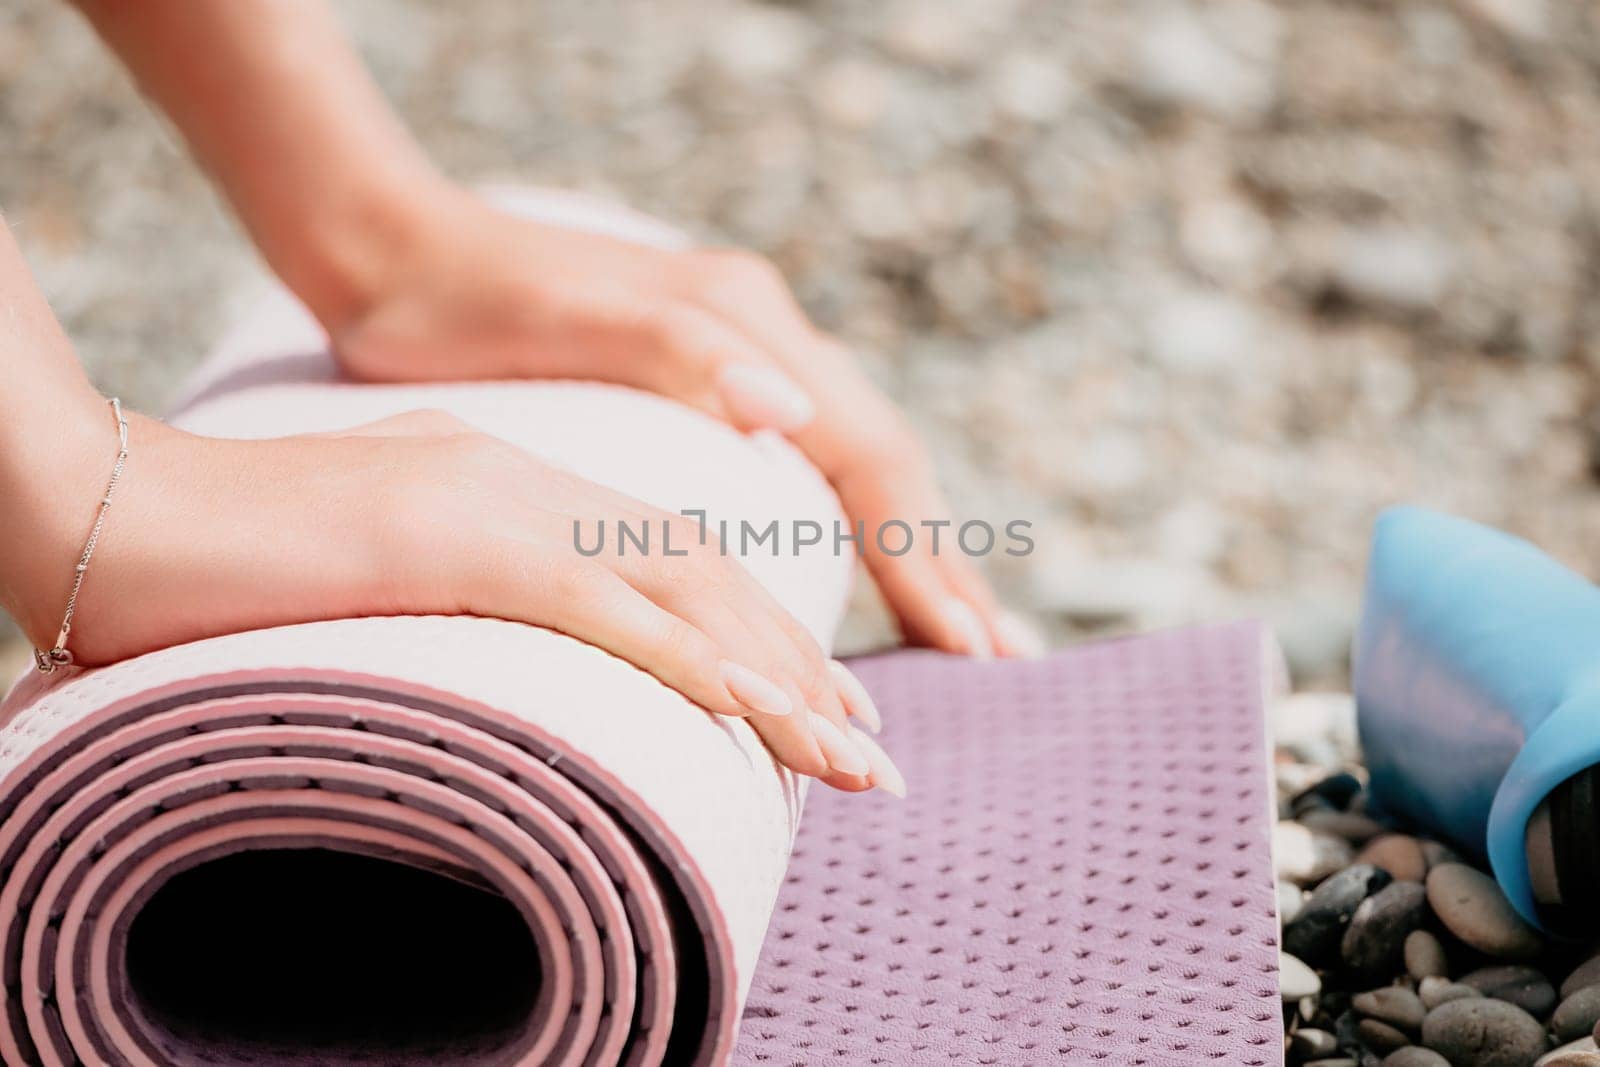 Young woman with long hair in white swimsuit and boho style braclets practicing outdoors on yoga mat by the sea on a sunset. Women's yoga fitness routine. Healthy lifestyle, harmony and meditation